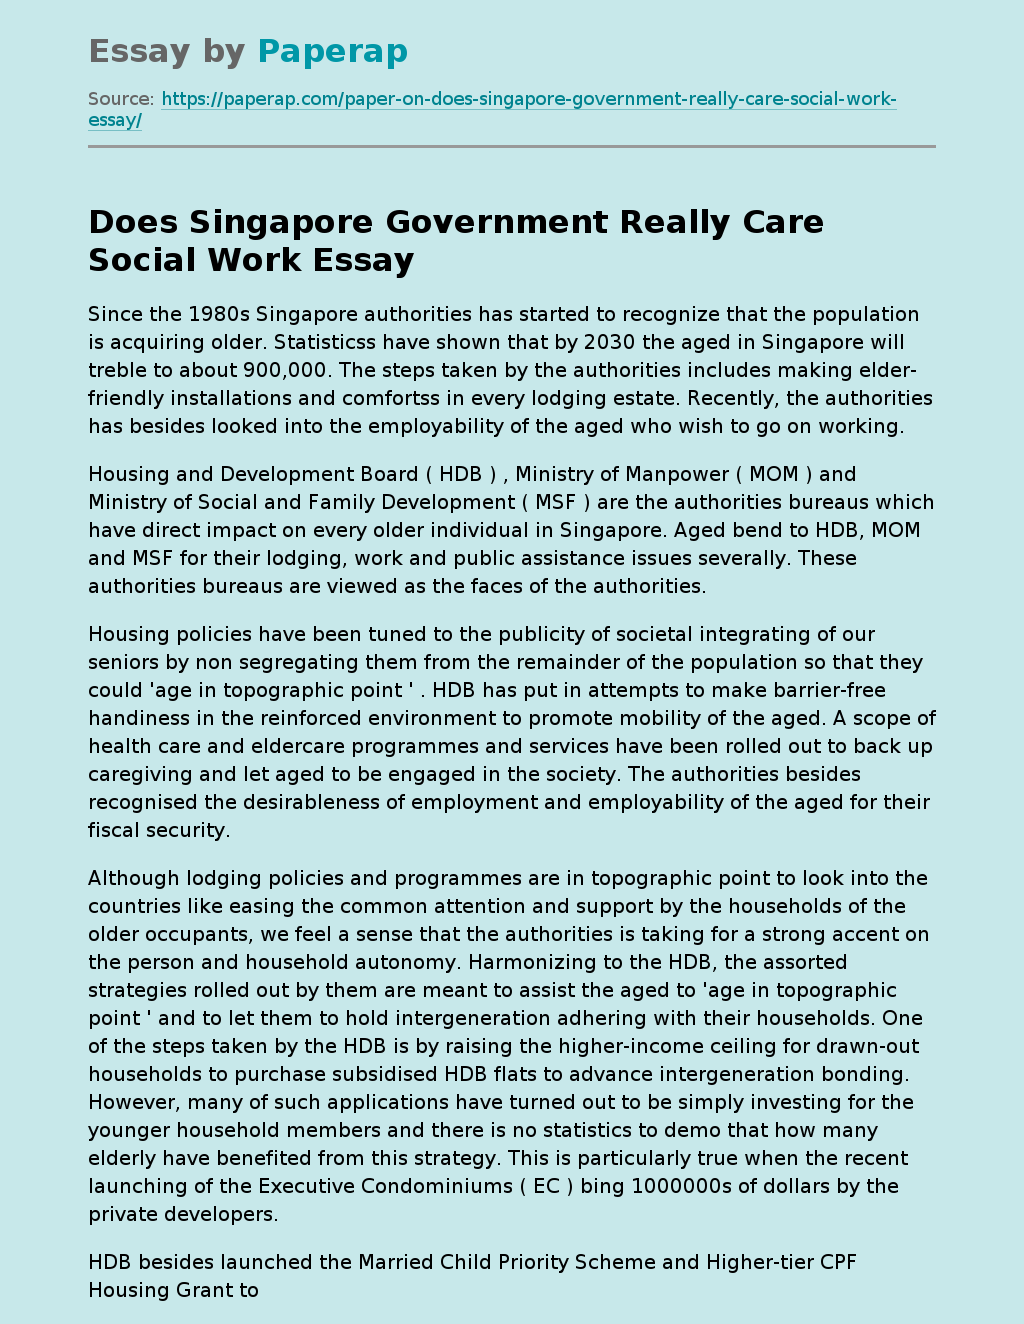 Does Singapore Government Really Care Social Work